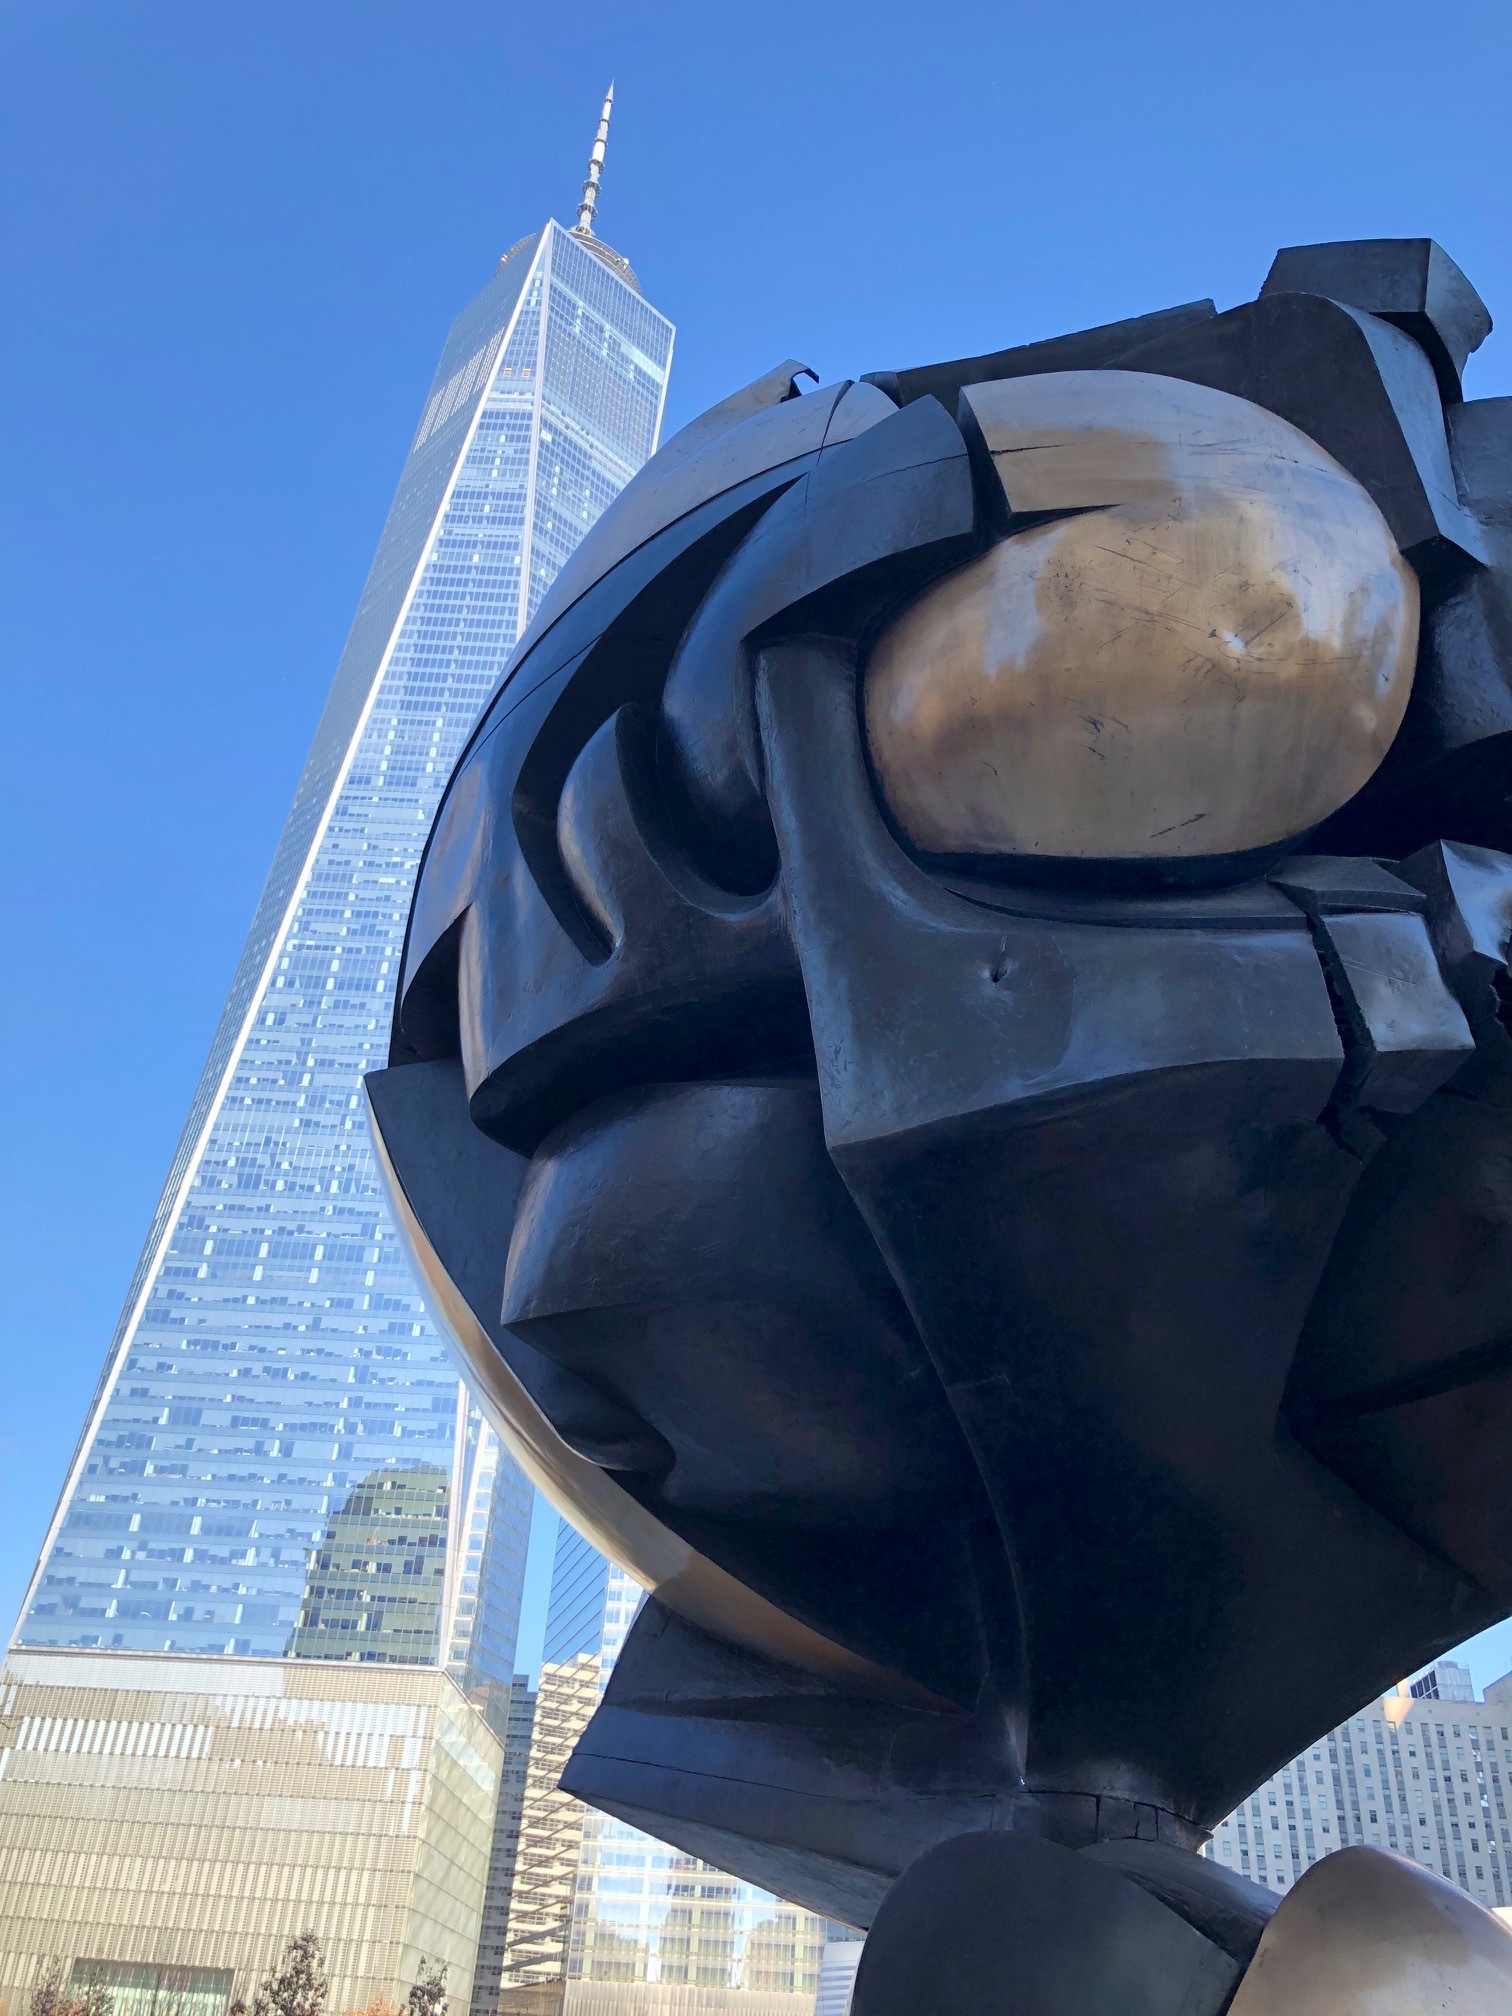  This sculpture was in the plaza at the original World Trade Center. It was pulled from the rubble after 9-11, and added to this park overlooking the site. 